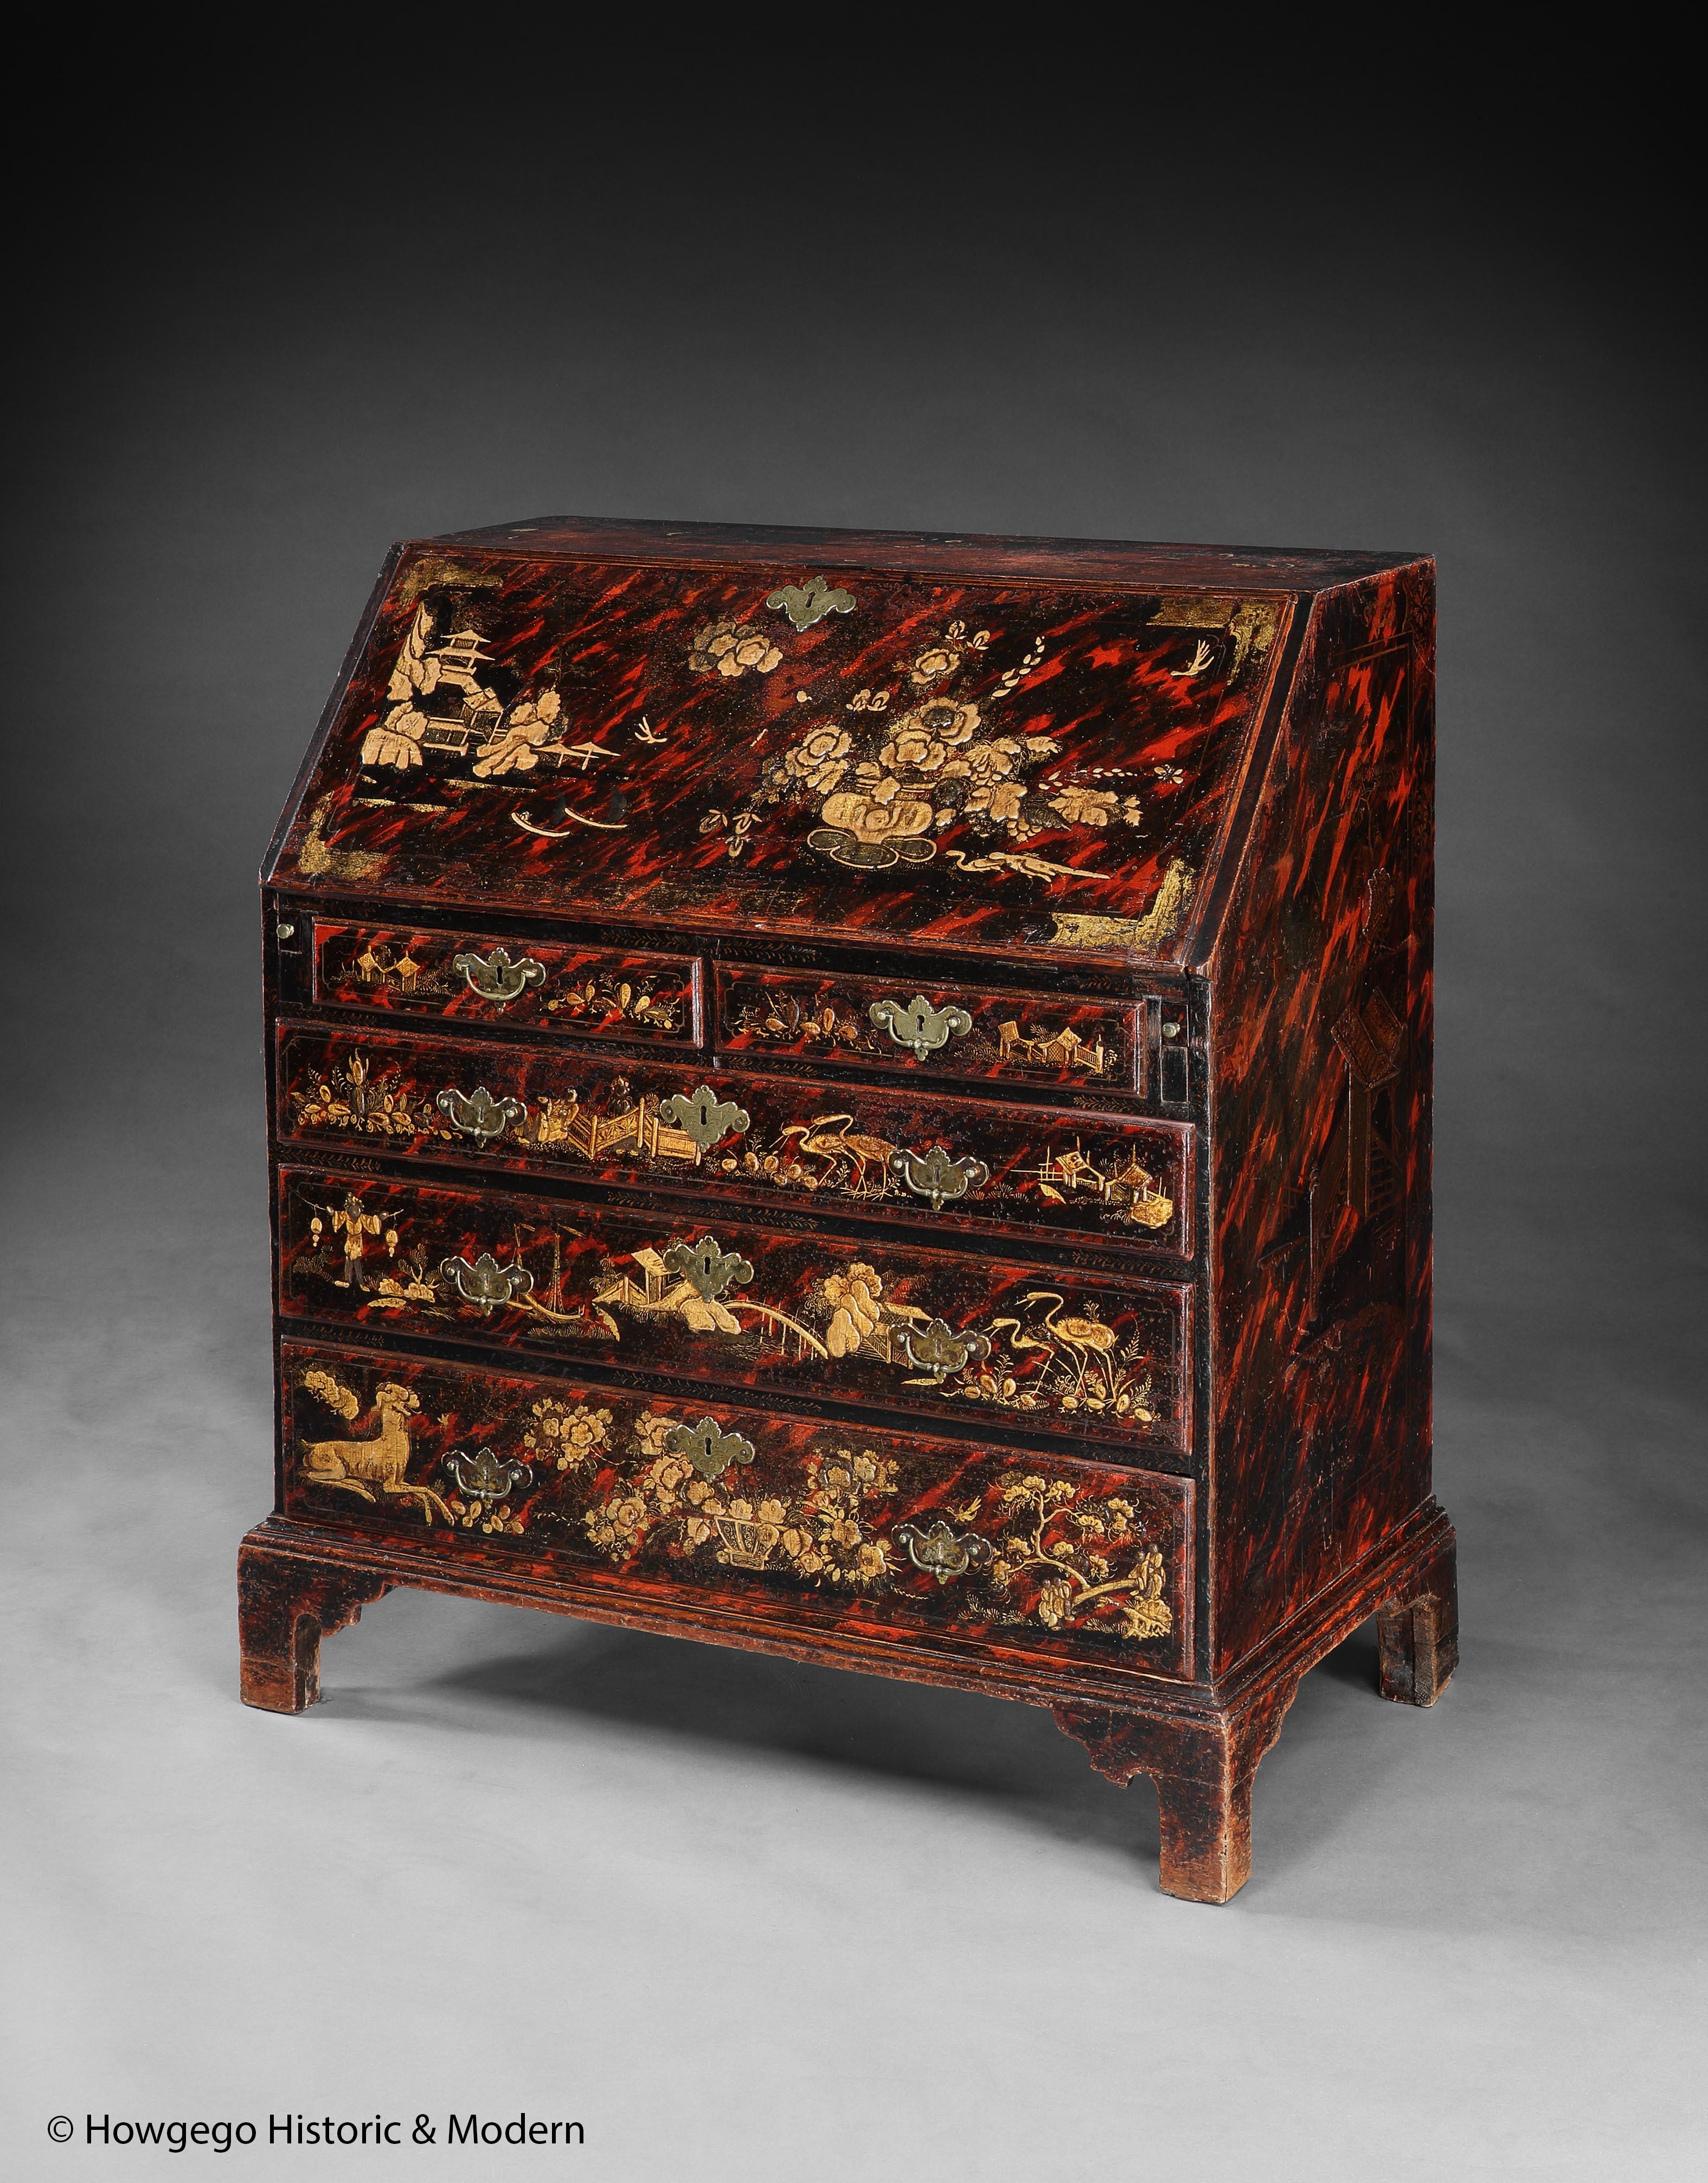 A rare, late-17th century / early-18th century, fall front bureau with gilded Chinoiserie Japanning & faux tortoishell ground.

“Before Japan was made in England, the imitation of tortoise-shell was much in request for cabinets, tables and the